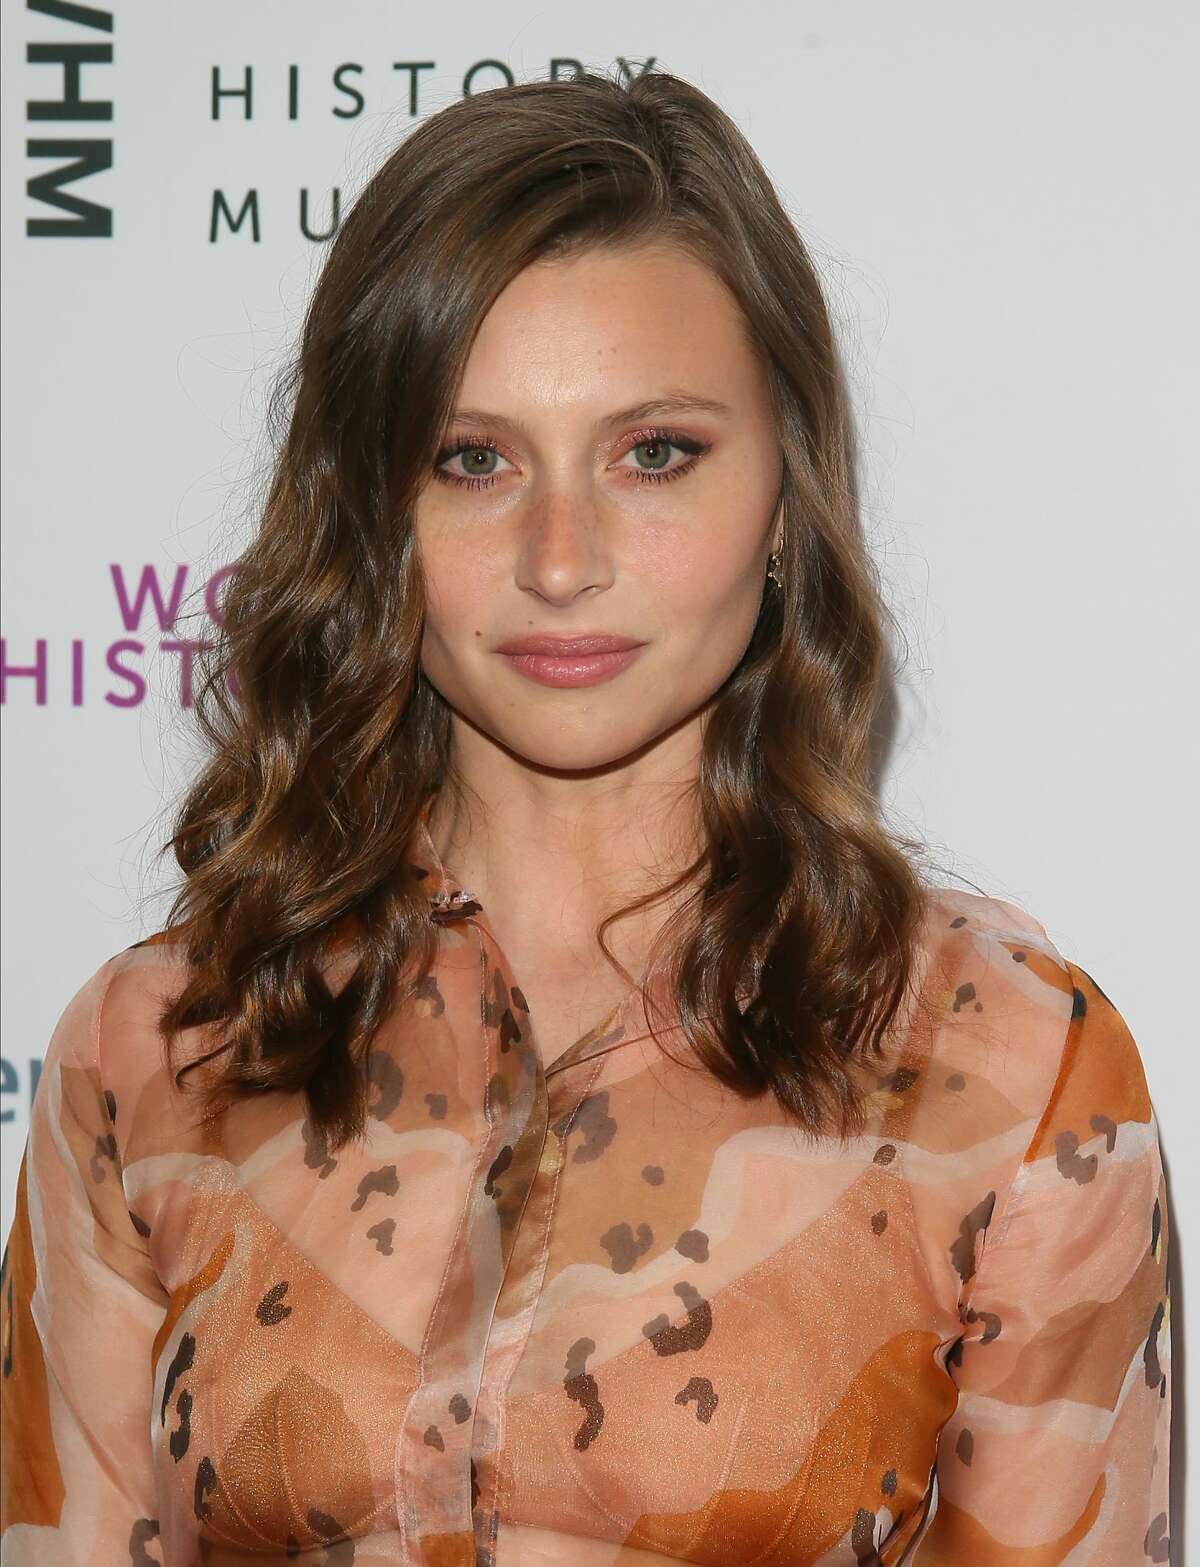 Aly Michalka attends the National Women's History Museum's 8th Annual Women Making History Awardsat Skirball Cultural Center on March 08, 2020 in Los Angeles, California. (Photo by Jean Baptiste Lacroix/FilmMagic)